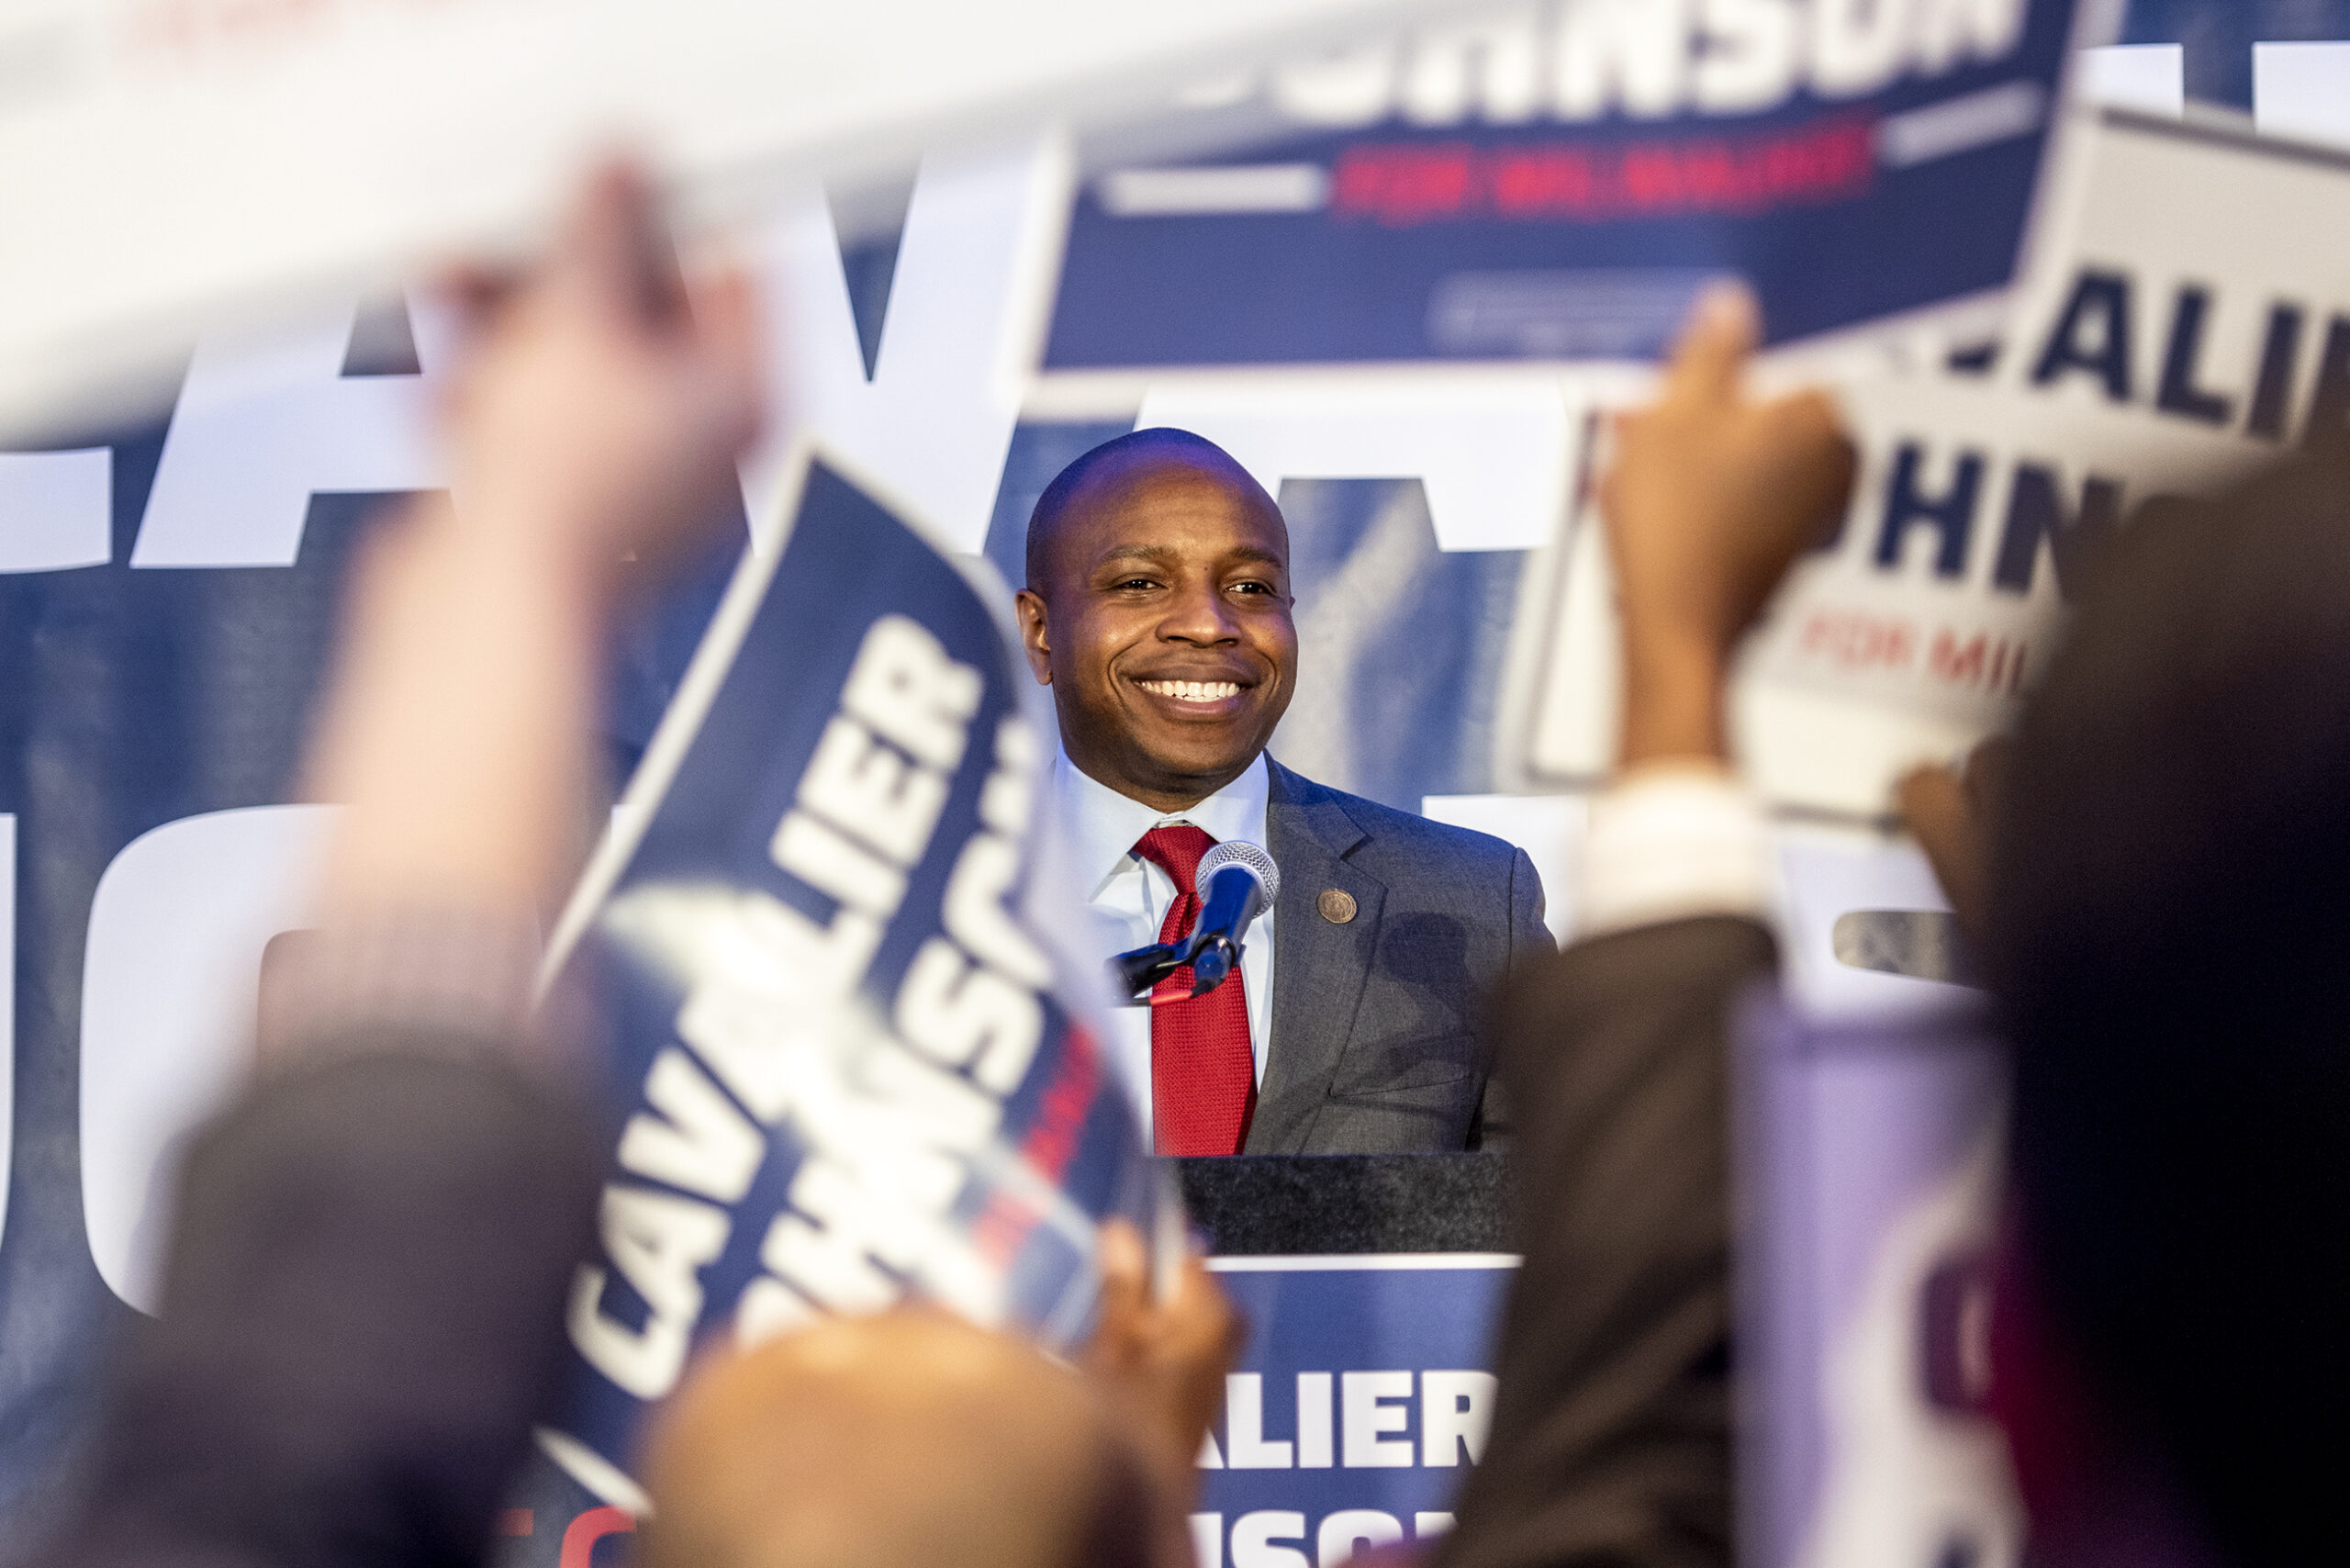 Cavalier Johnson smiles as his supporters hold up signs.